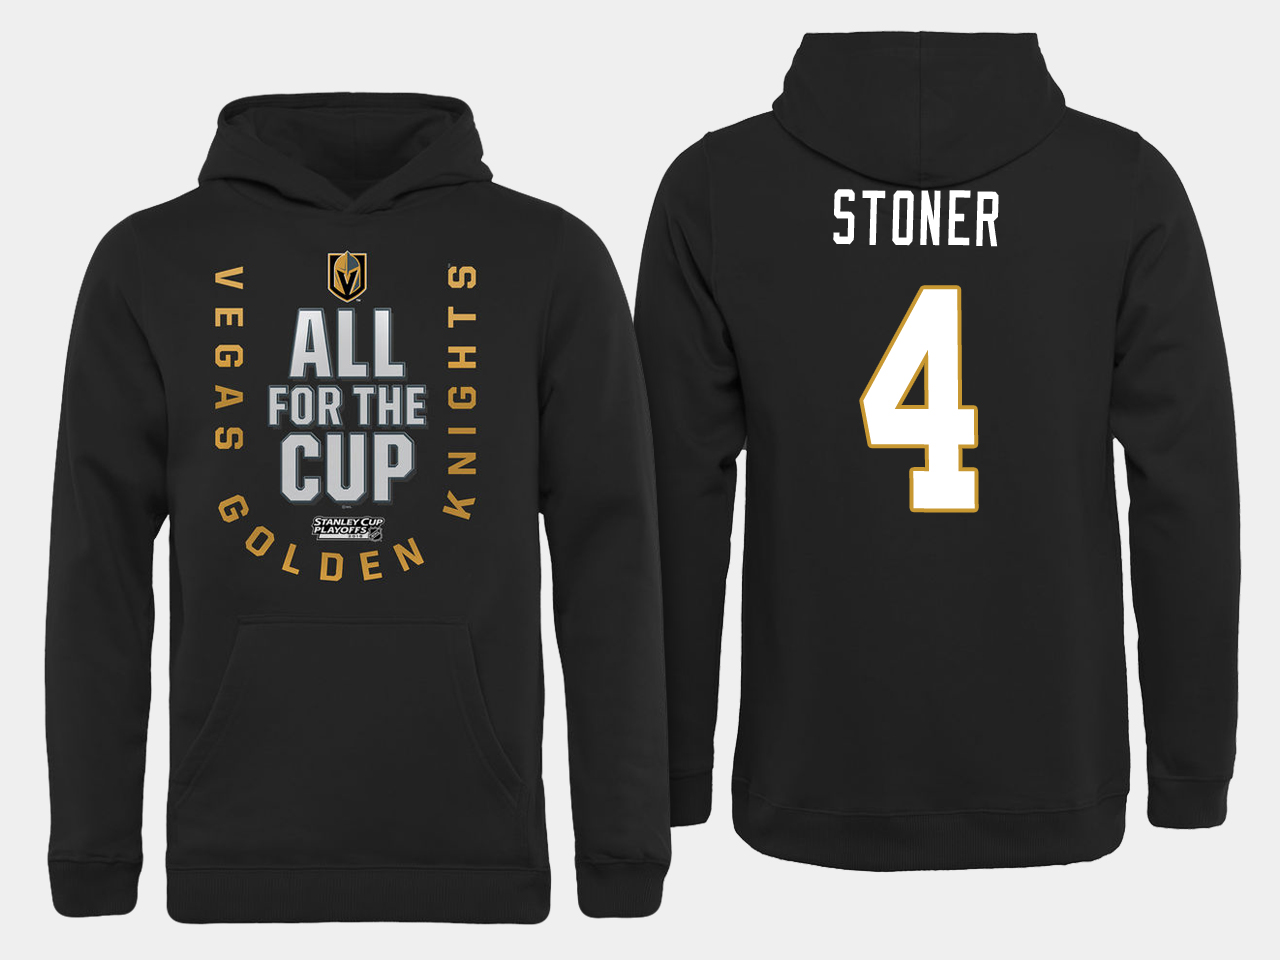 Men NHL Vegas Golden Knights #4 Stoner All for the Cup hoodie->san jose sharks->NHL Jersey